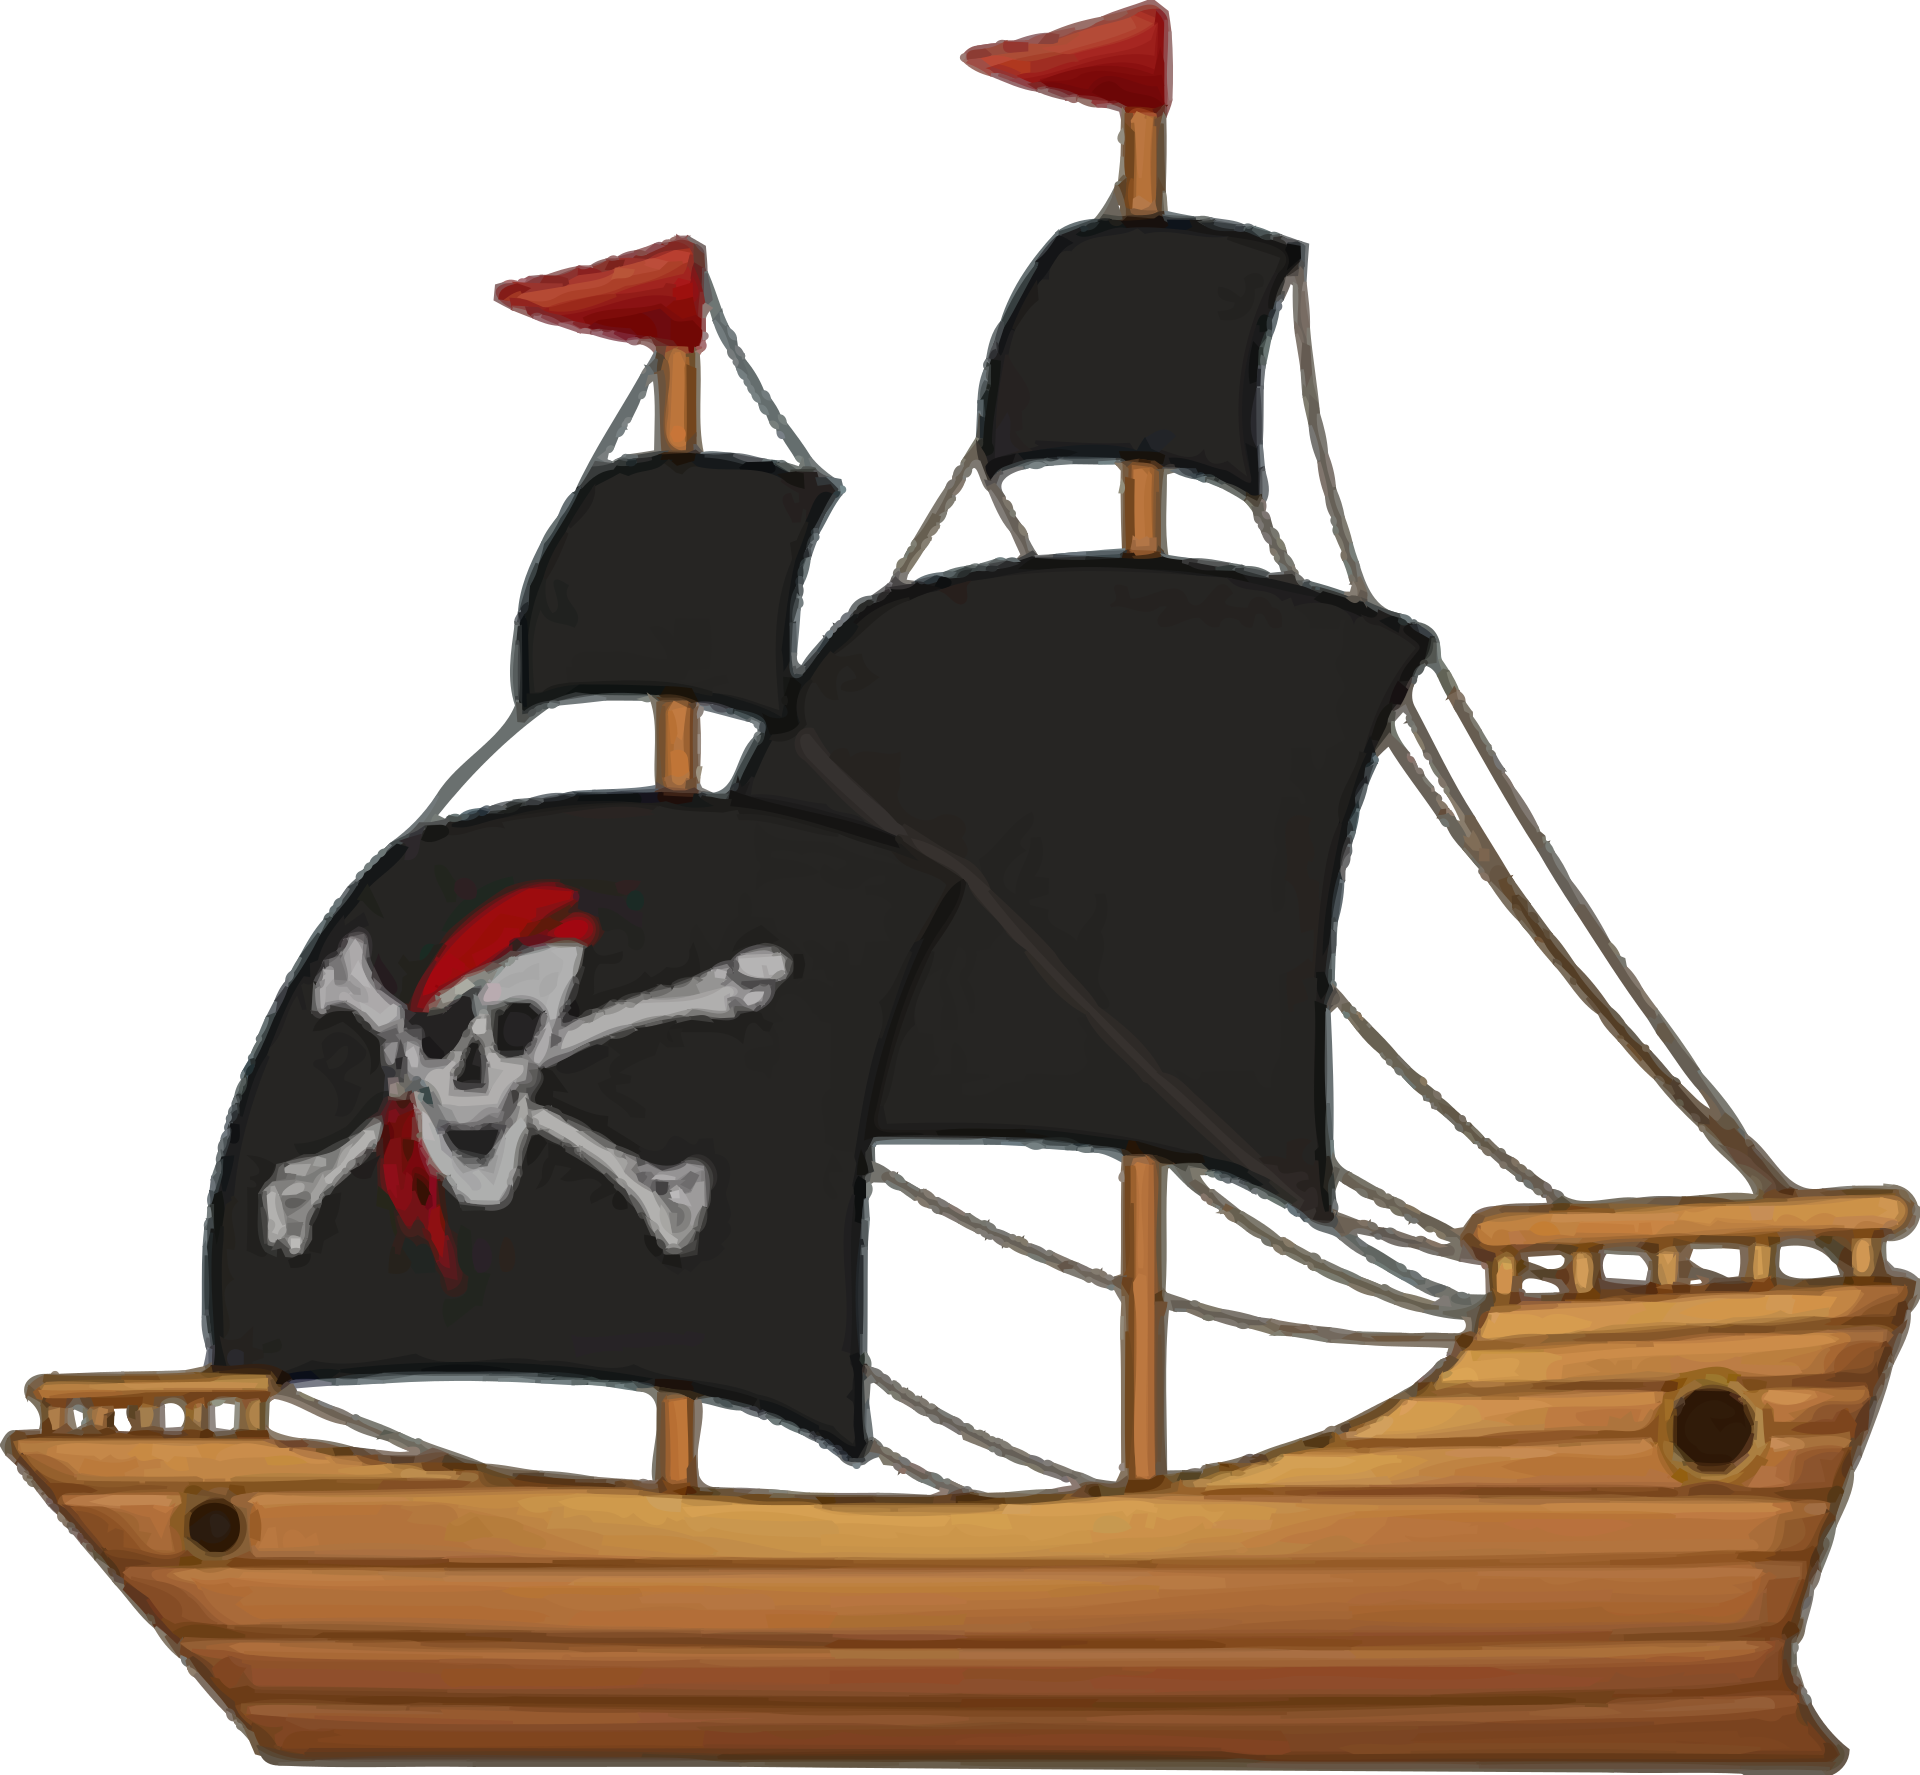 A ship with a pirate's flag